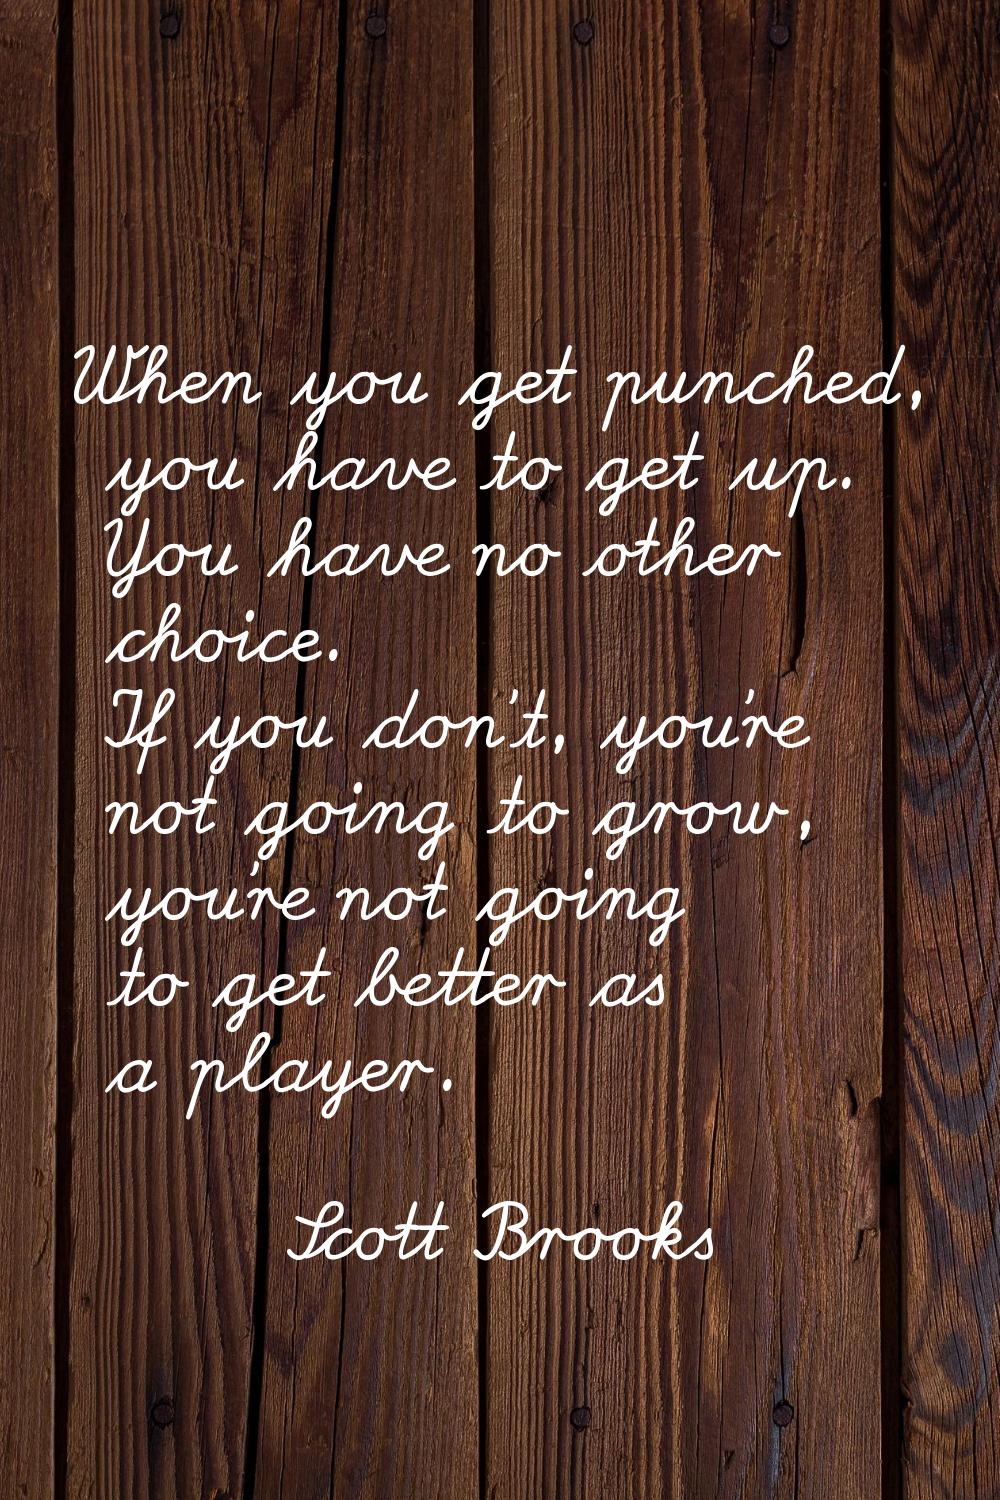 When you get punched, you have to get up. You have no other choice. If you don't, you're not going 